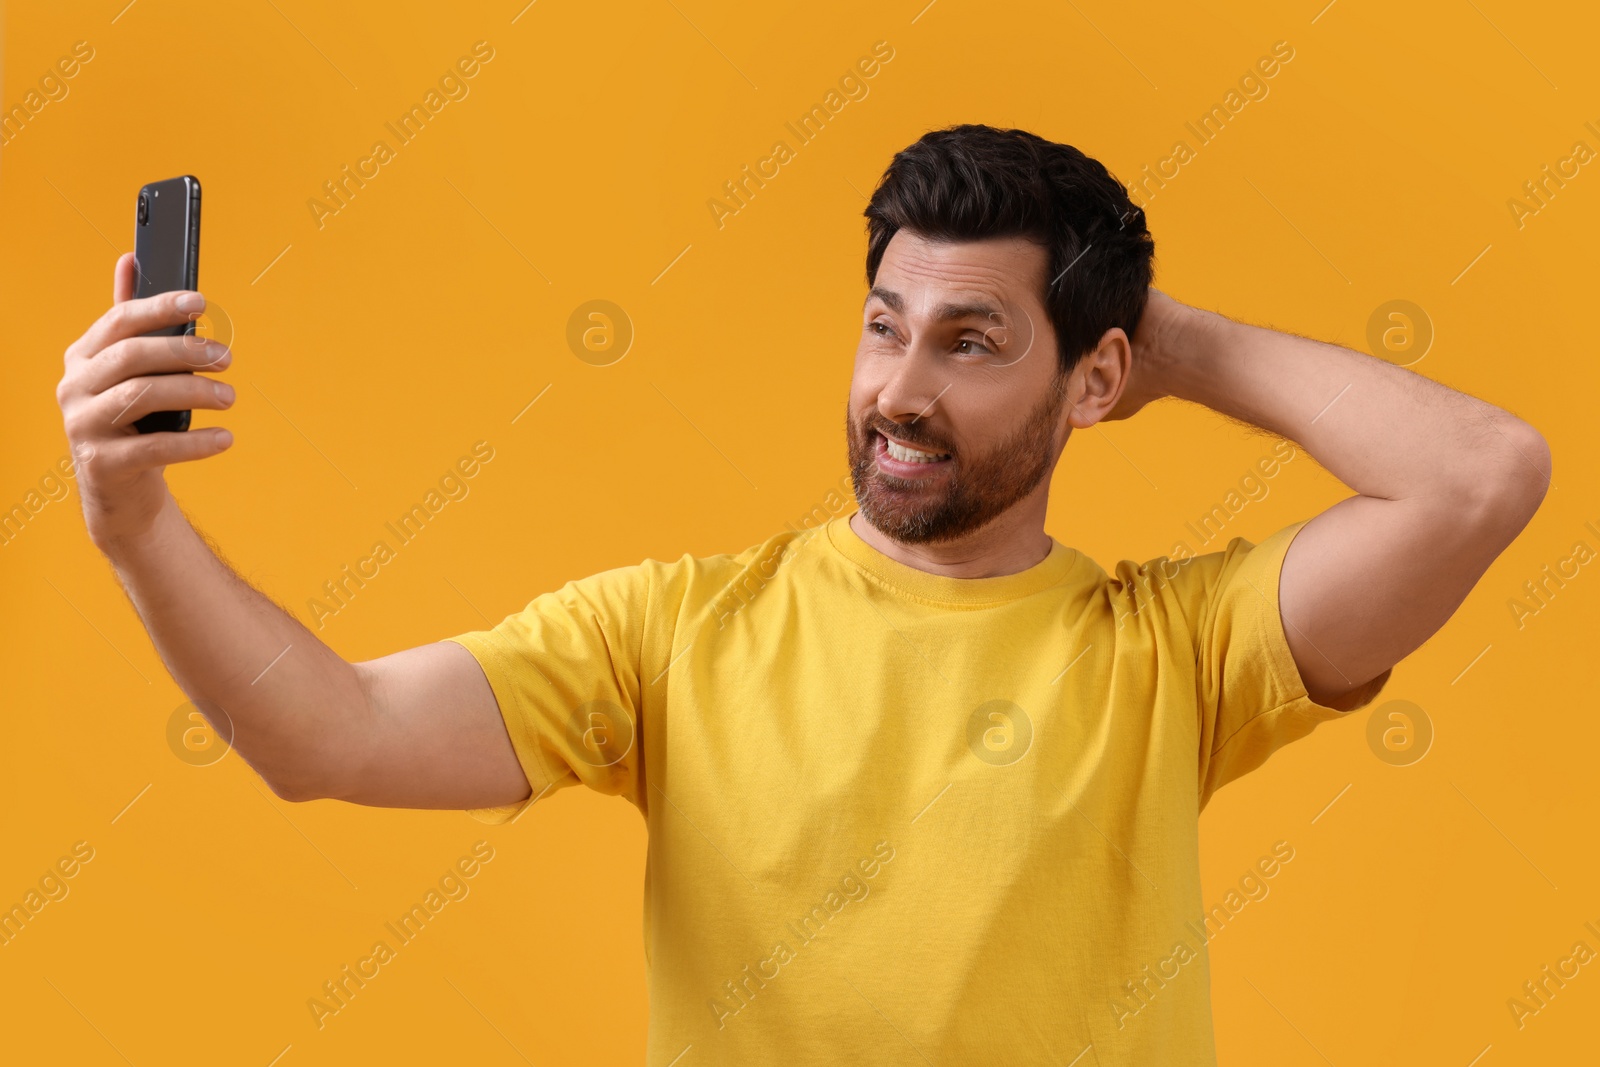 Photo of Emotional man taking selfie with smartphone on yellow background